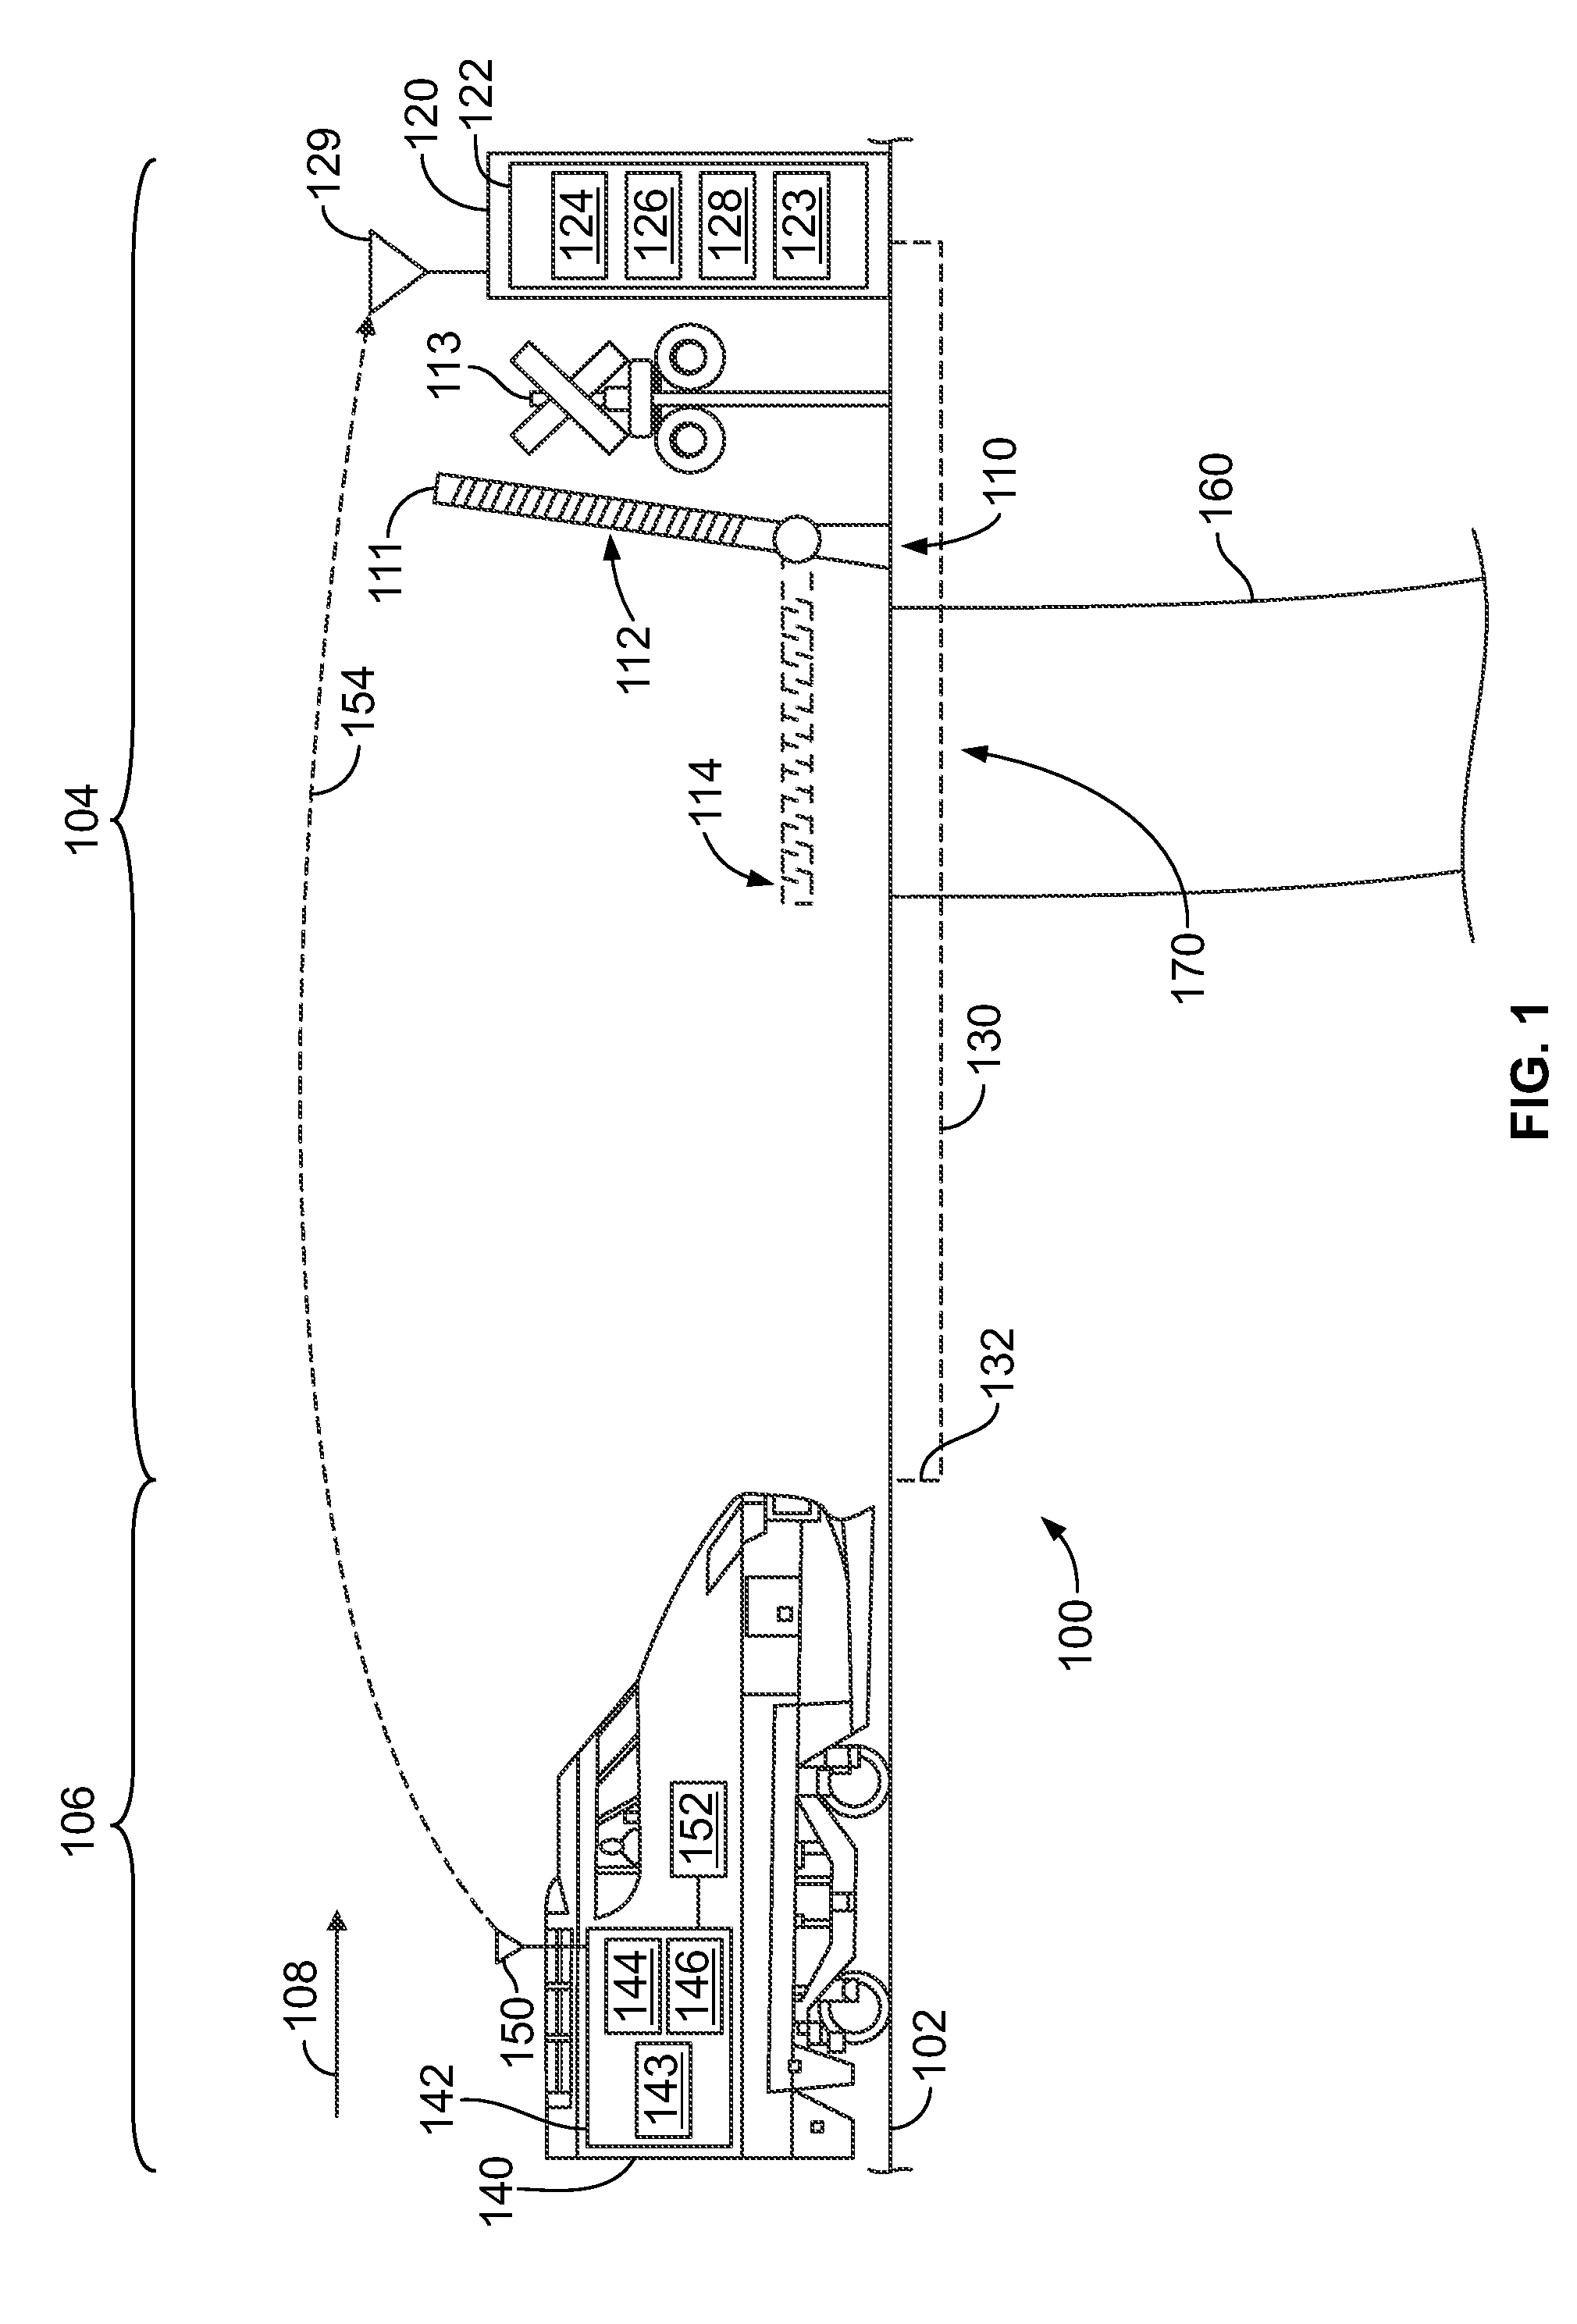 Systems and Methods for Providing Constant Warning Time At Crossings